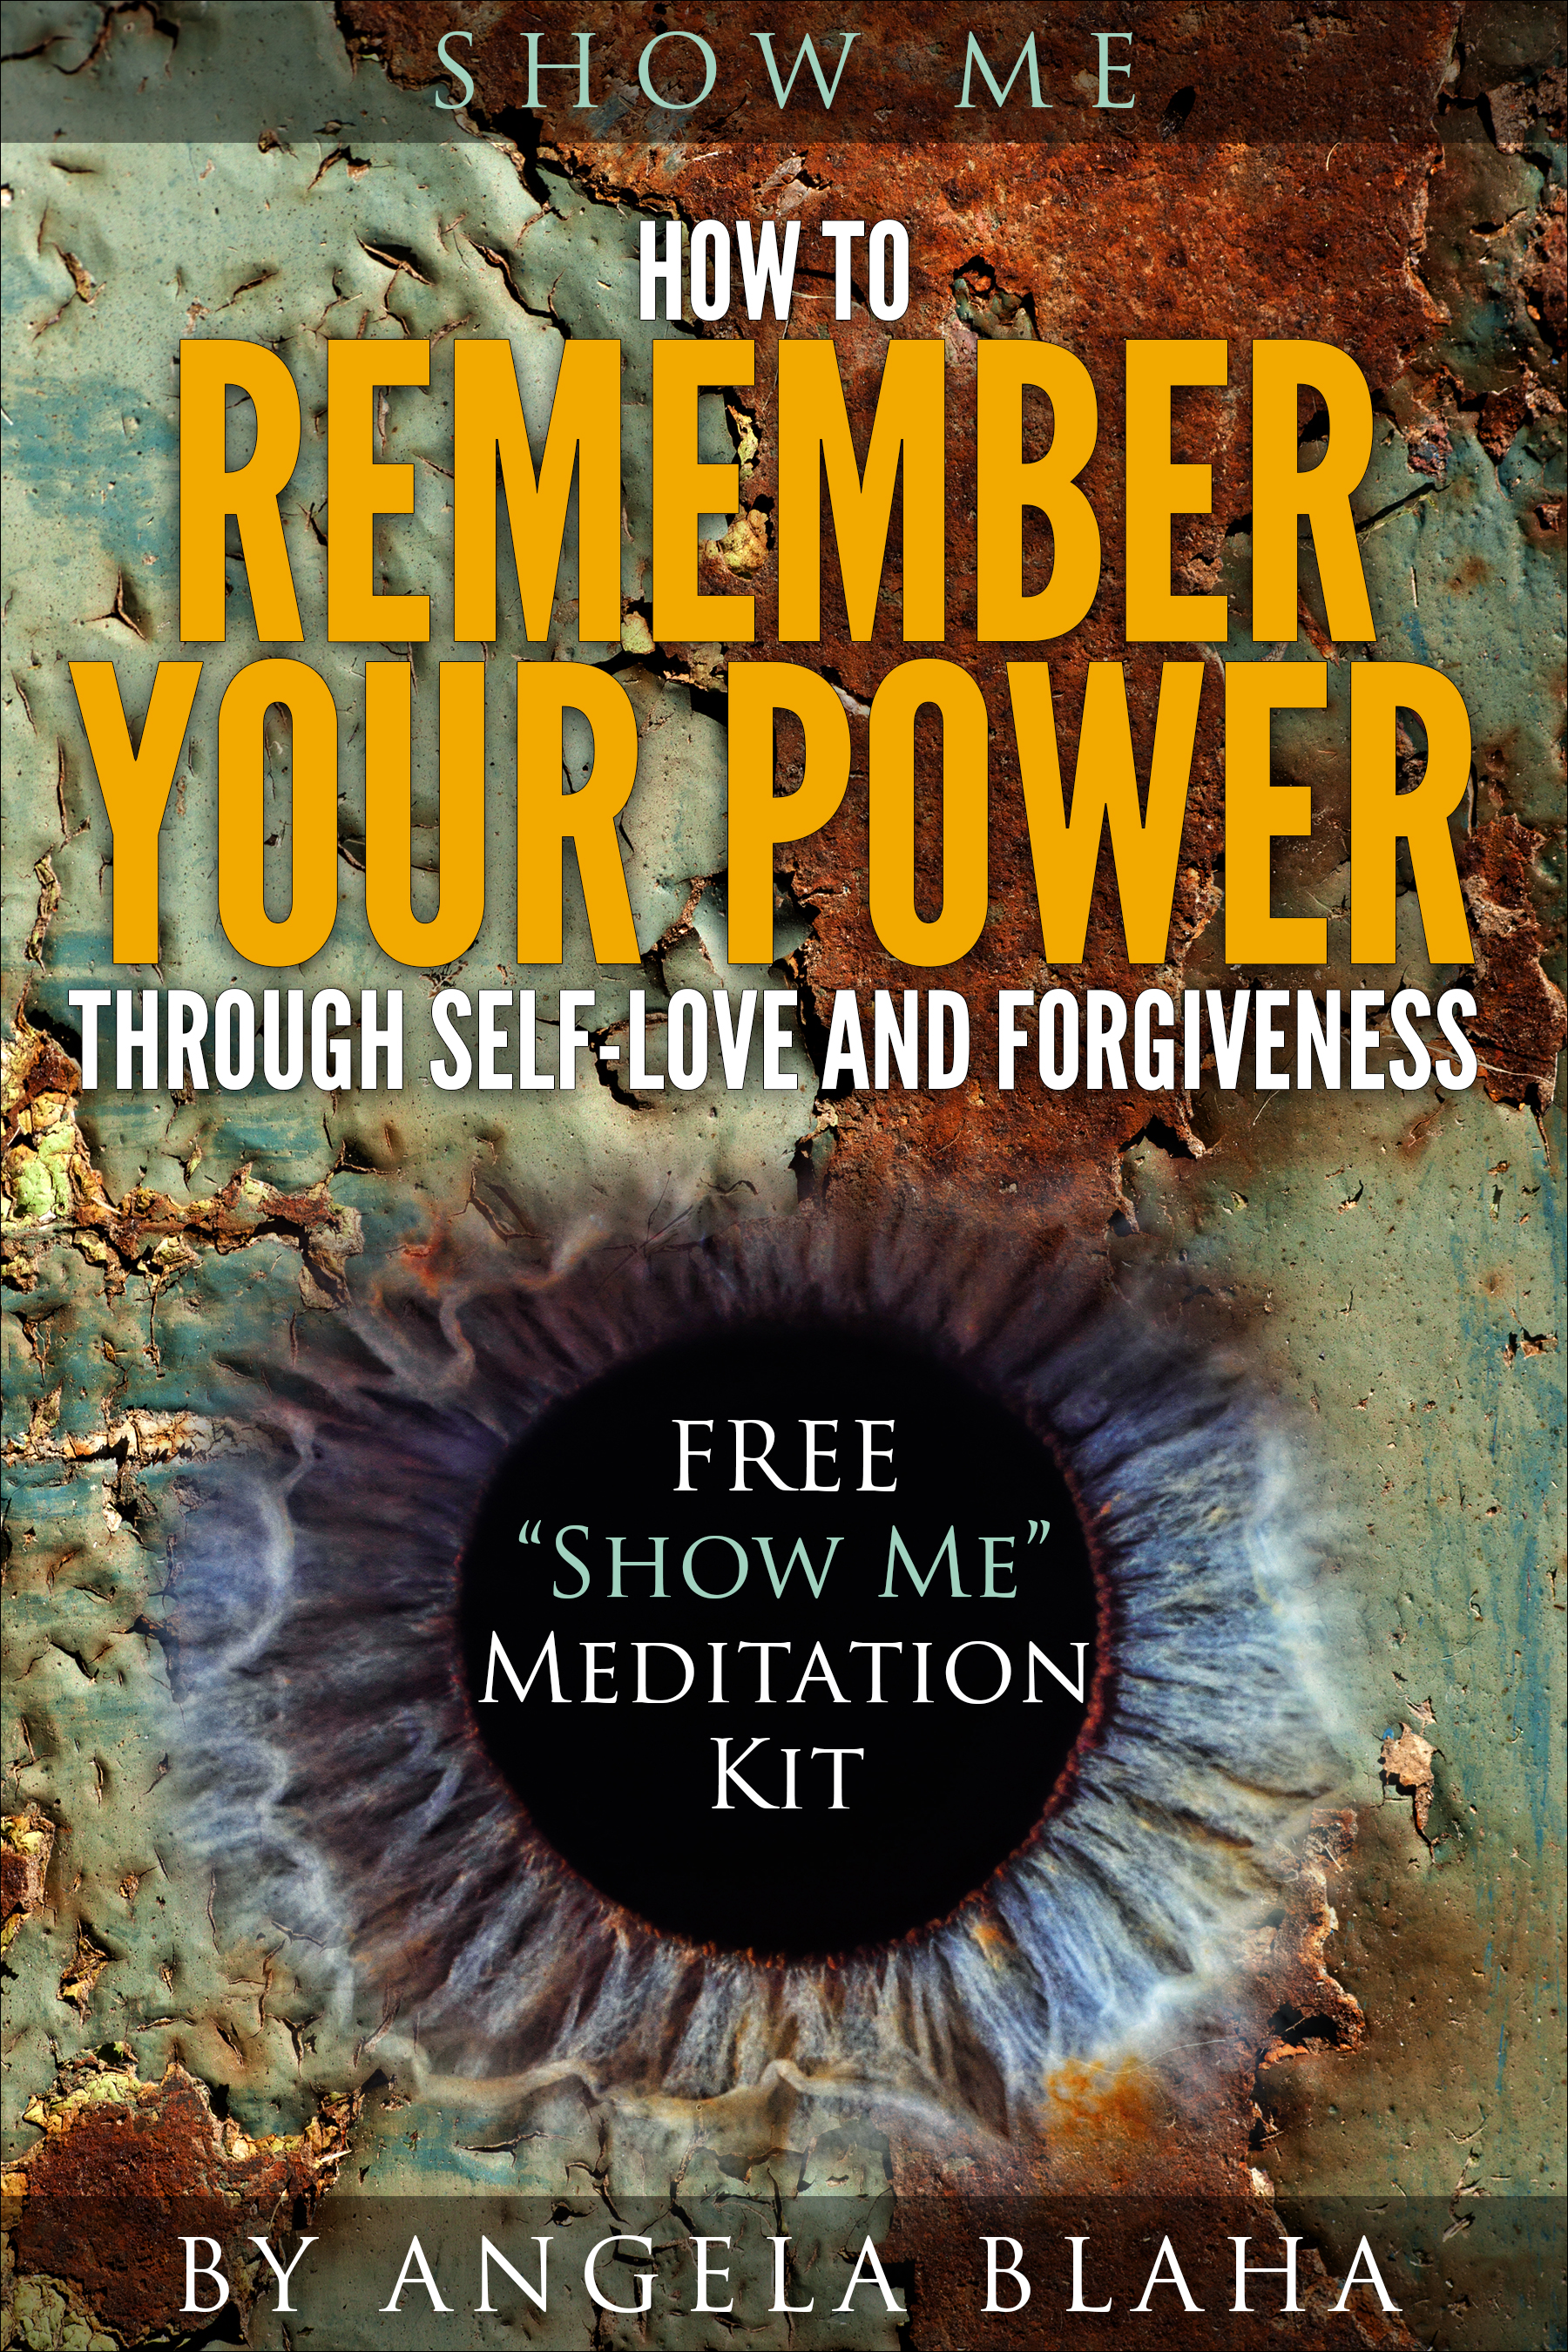 Show Me How to Remember Your Power through Self-Love and Forgiveness by Angela Blaha